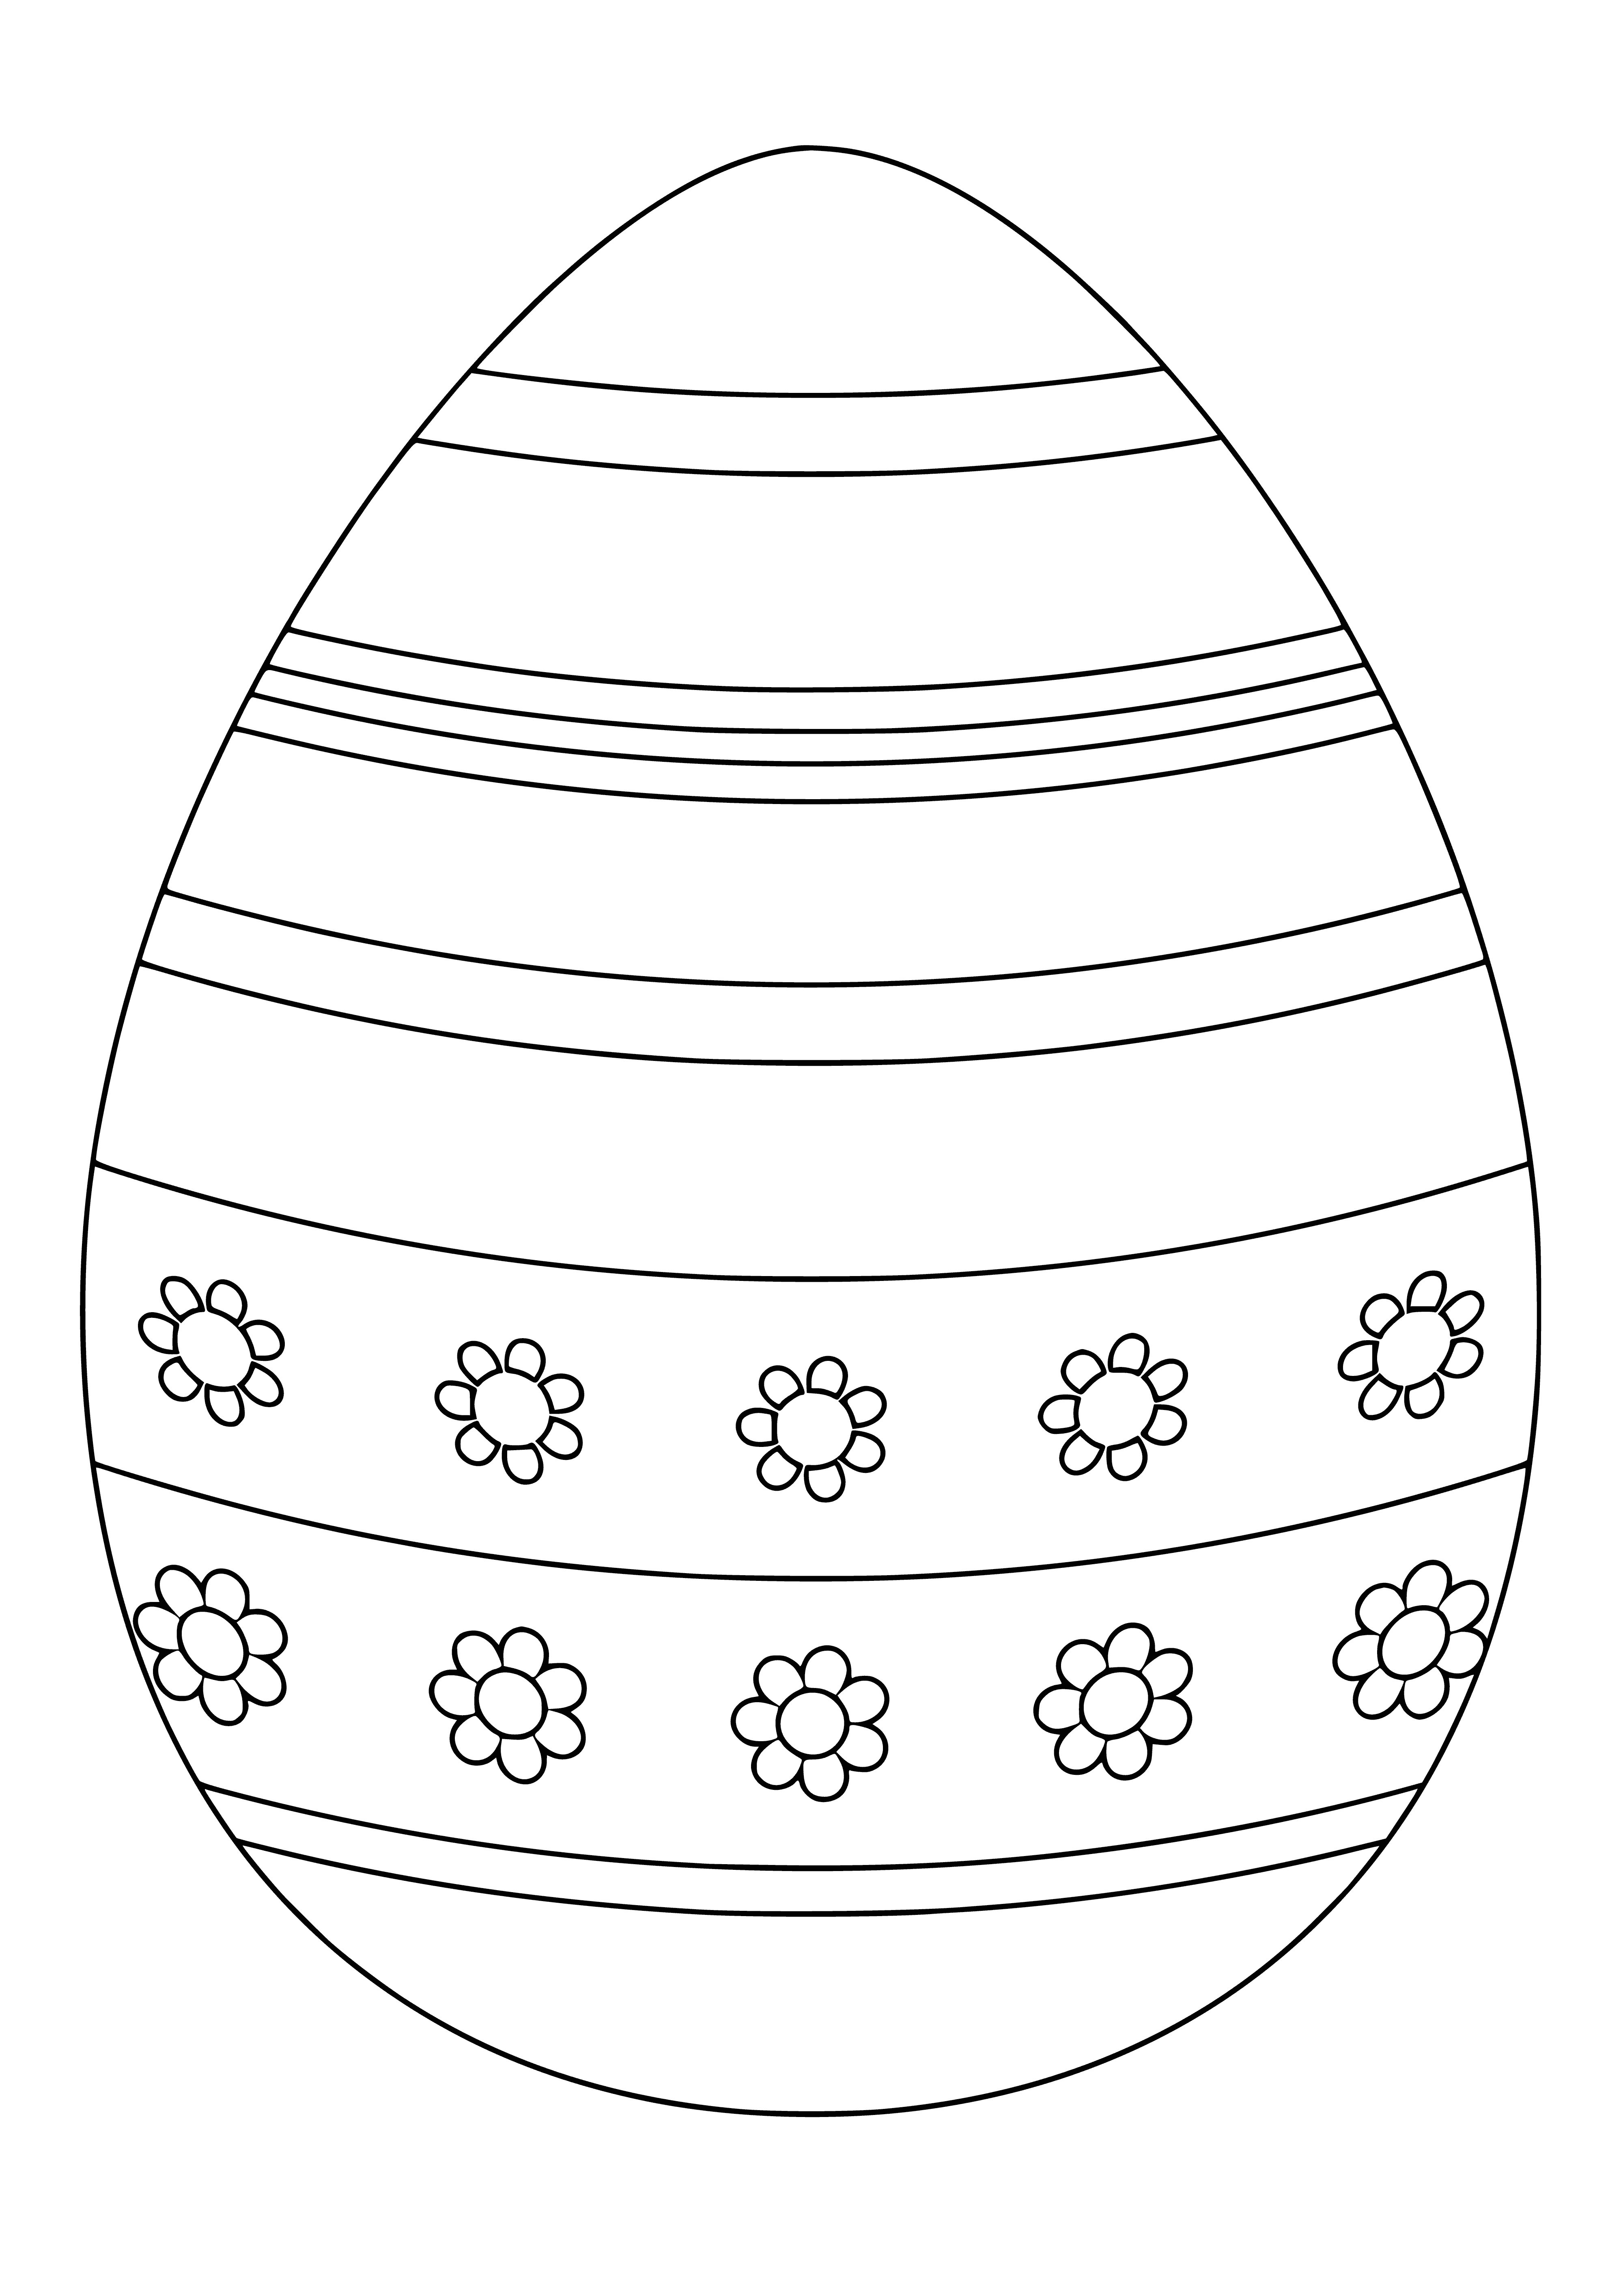 coloring page: #140characters

Three Easter eggs; top left=blue/white spots, below=yellow/white spots, bottom right=pink/white spots.